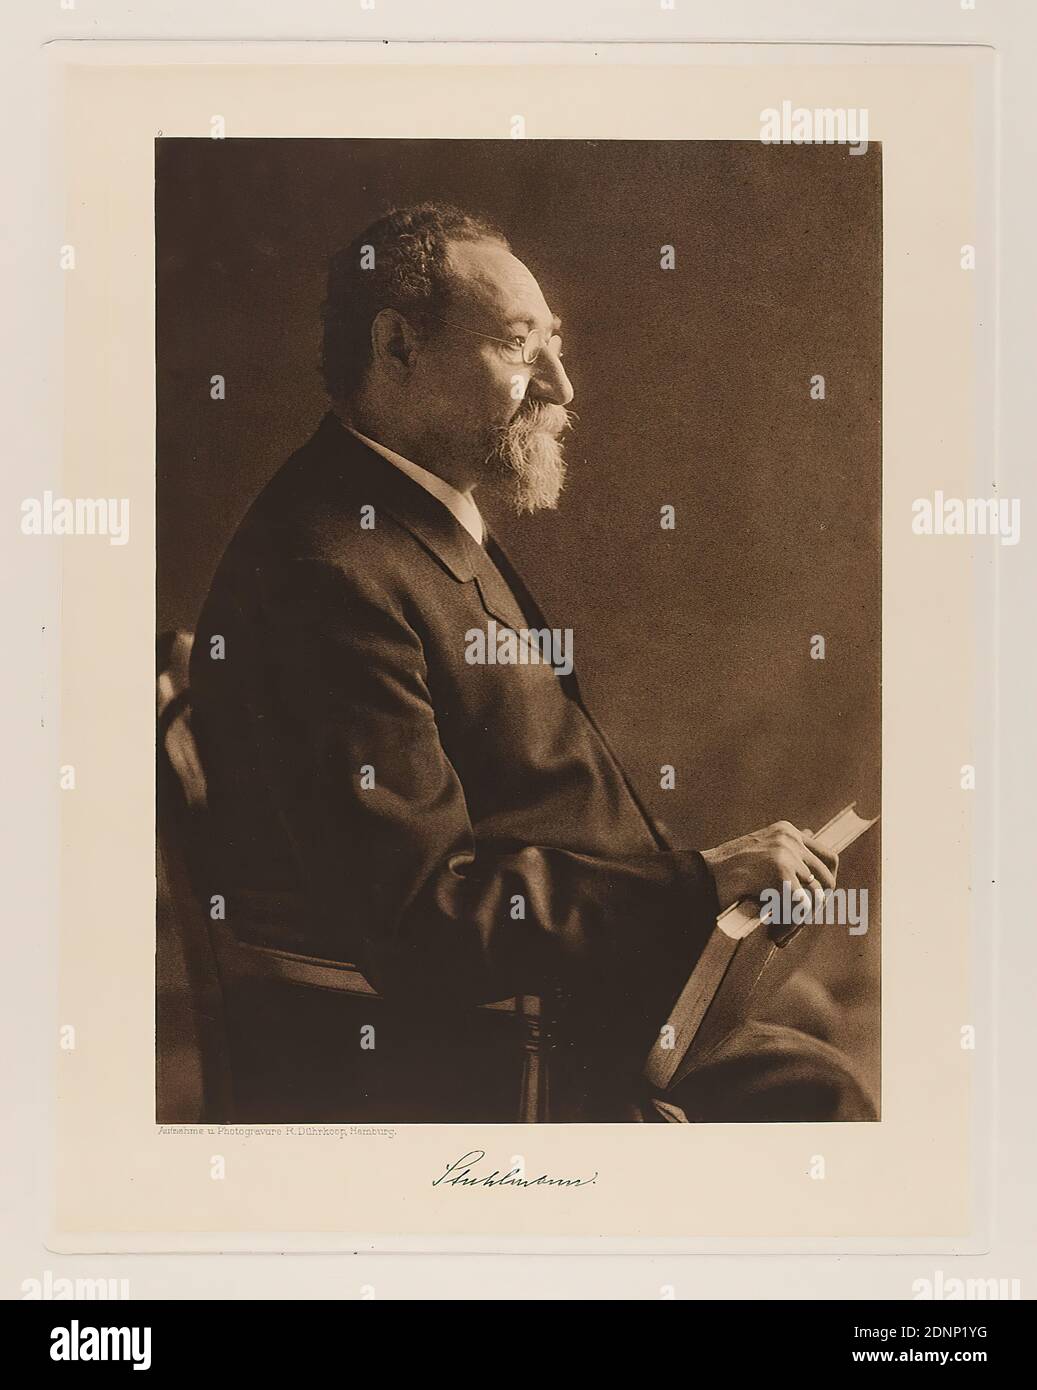 Rudolph Dührkoop, Dr. phil. E. J. A. Stuhlmann, school councillor and head of the vocational school from the portfolio Hamburgische Männer und Frauen am Anfang des XX. Jahrhunderts, Staatliche Landesbildstelle Hamburg, collection on the history of photography, paper, heliogravure, image size: height: 22,20 cm; width: 16,30 cm, signed: recto below the image: imprinted signature of the sitter, inscribed: recto: engraved on printing plate, below the image: photograph and photogravure R. Dührkoop, Hamburg, top left above picture 9; top right in the corner noted in lead: 116, stamp: recto Stock Photo